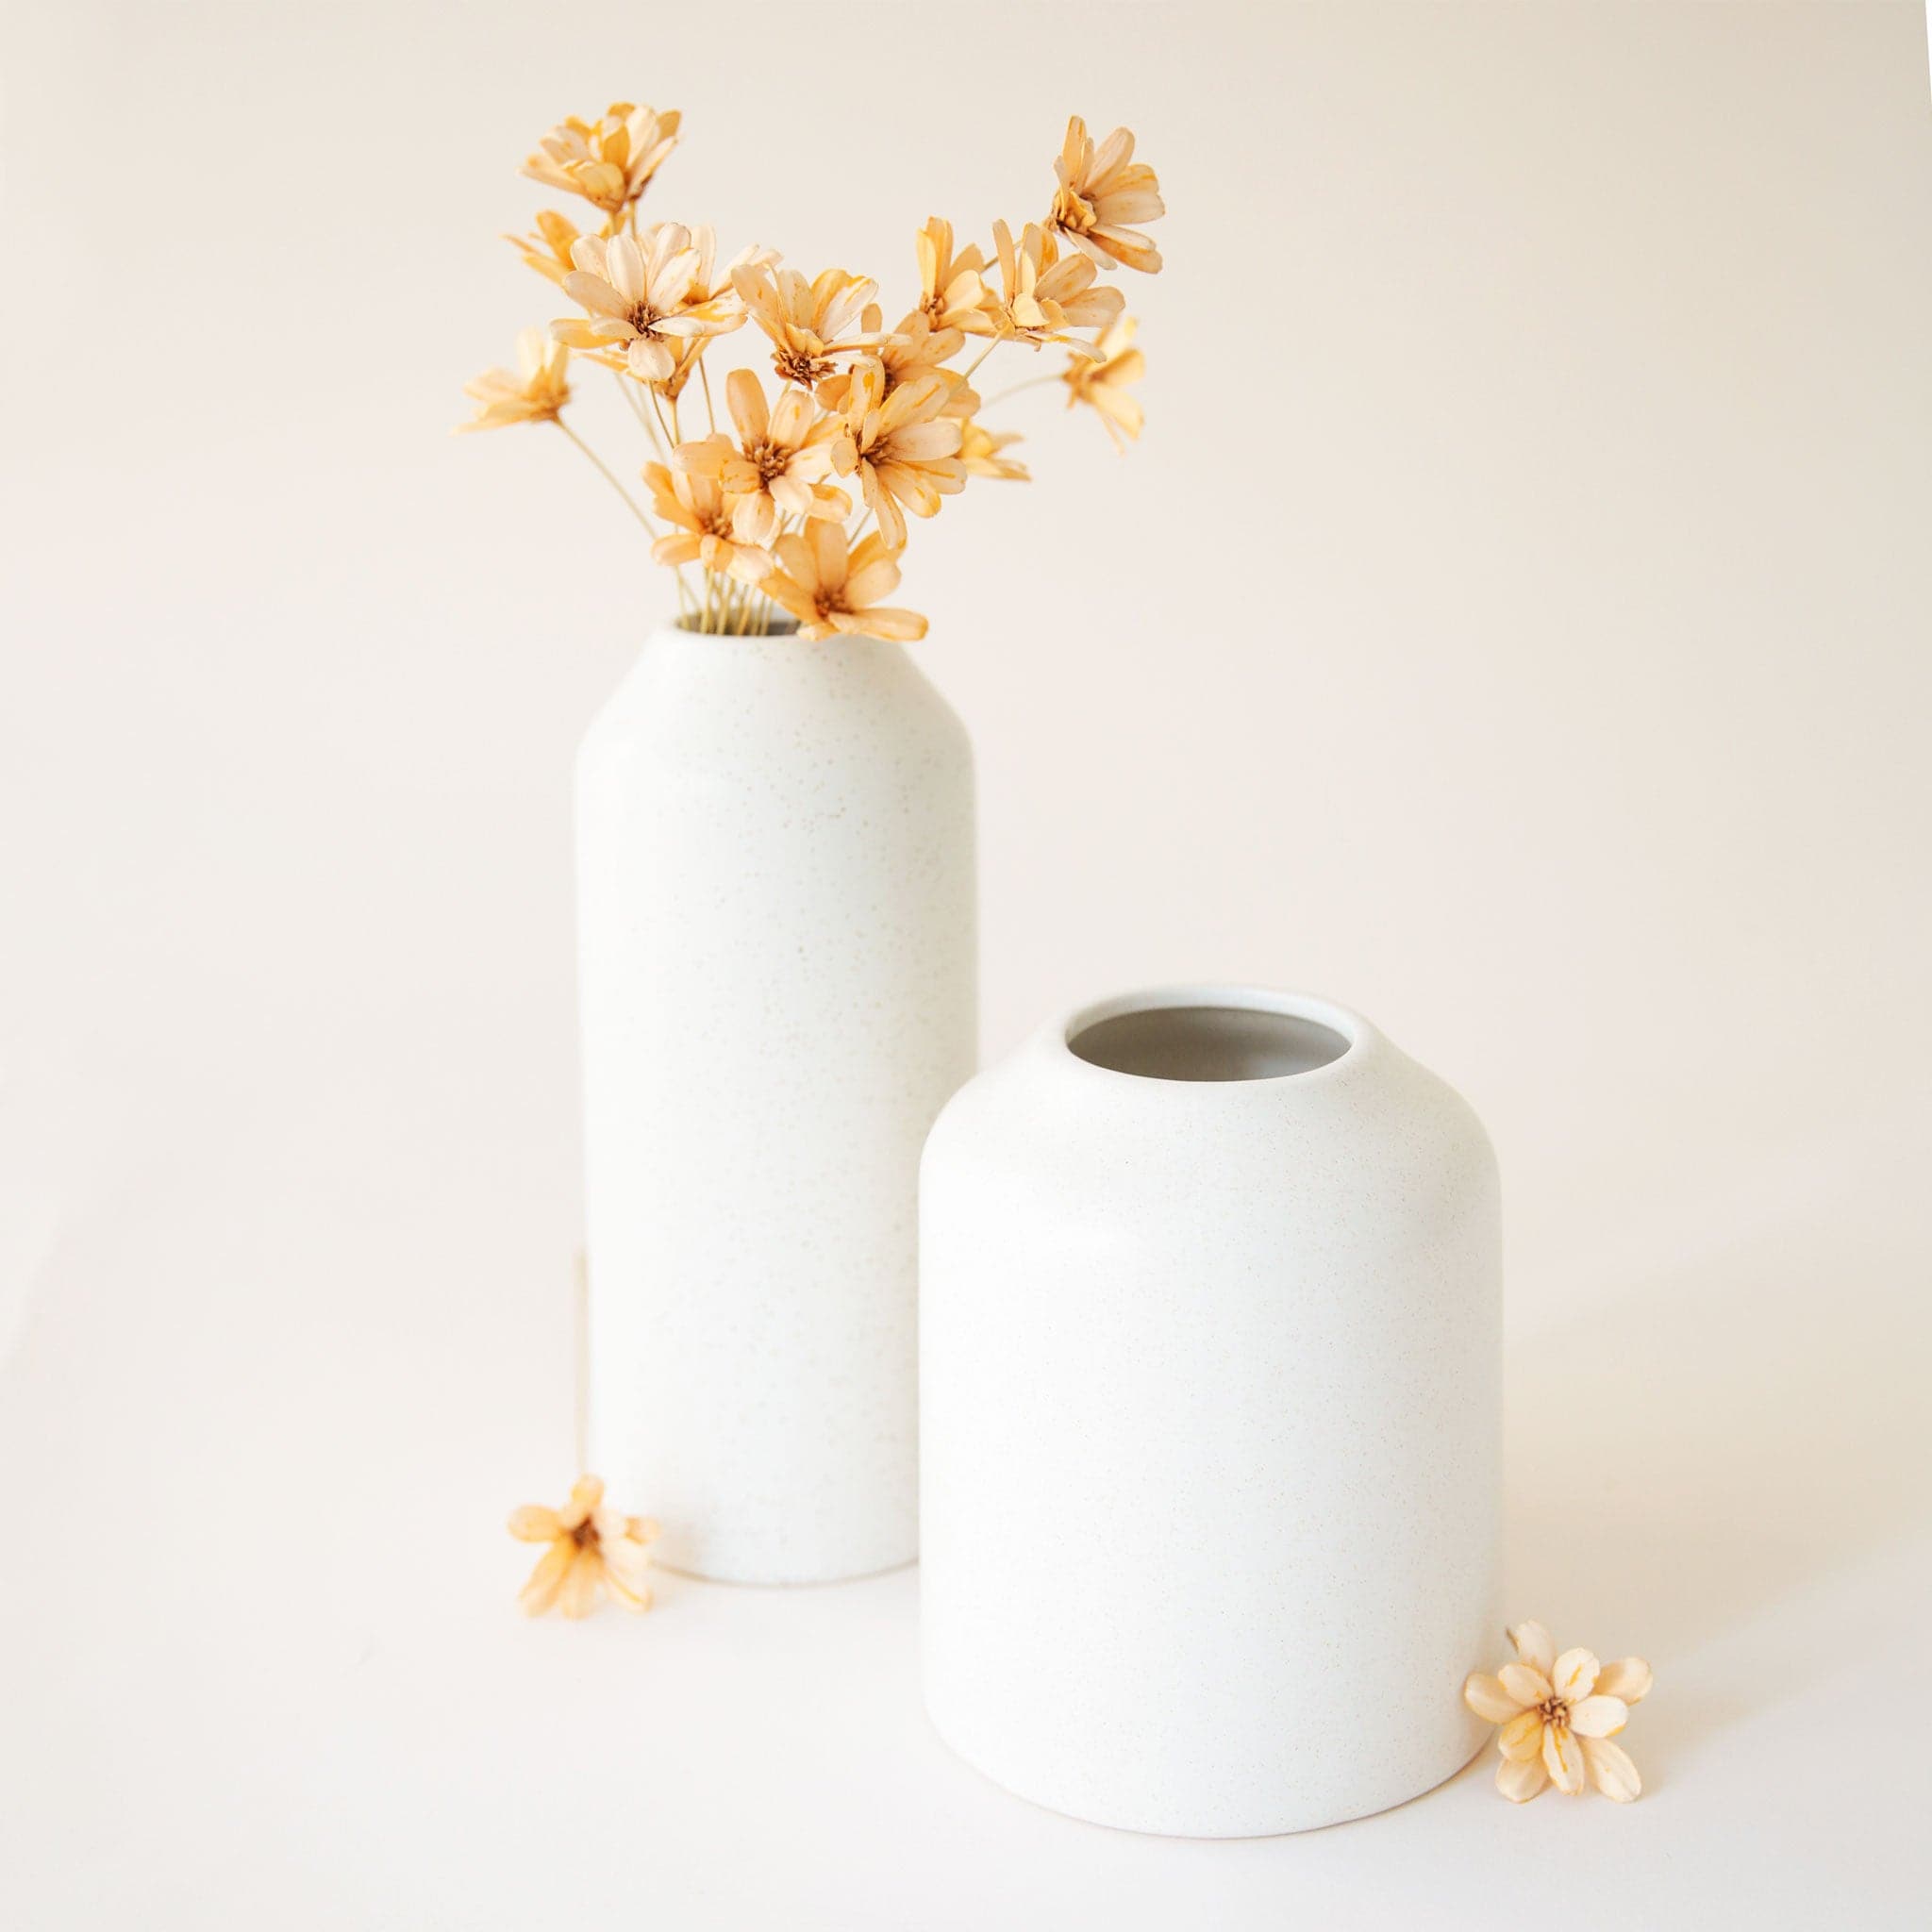 On a cream background is two different sizedl white ceramic vase with an opening at the top and staged with dried florals.